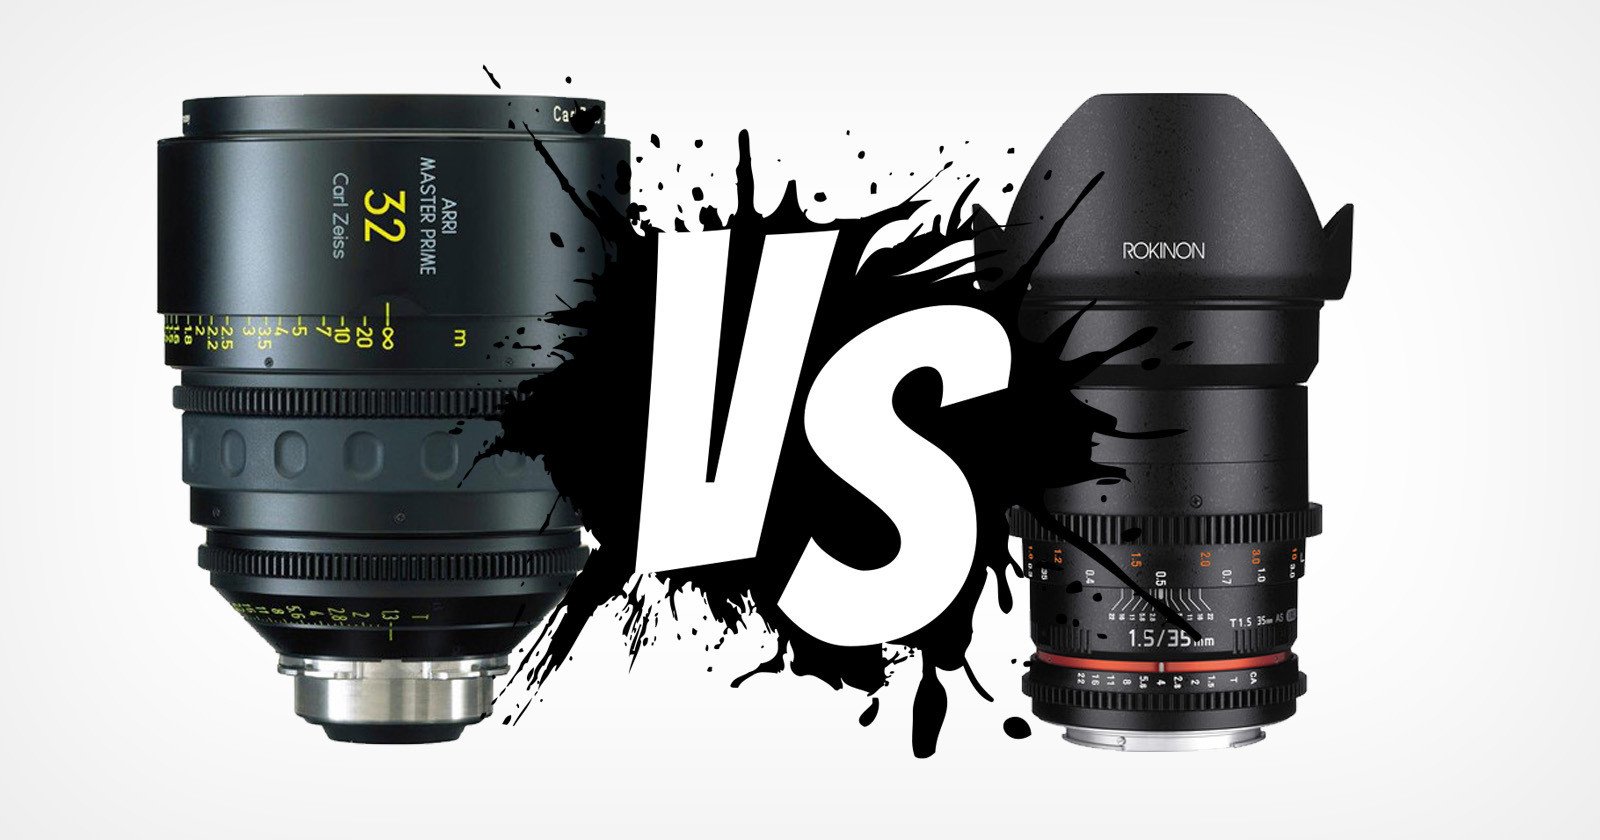 Whats the Difference Between a $500 and $26,000 Lens?